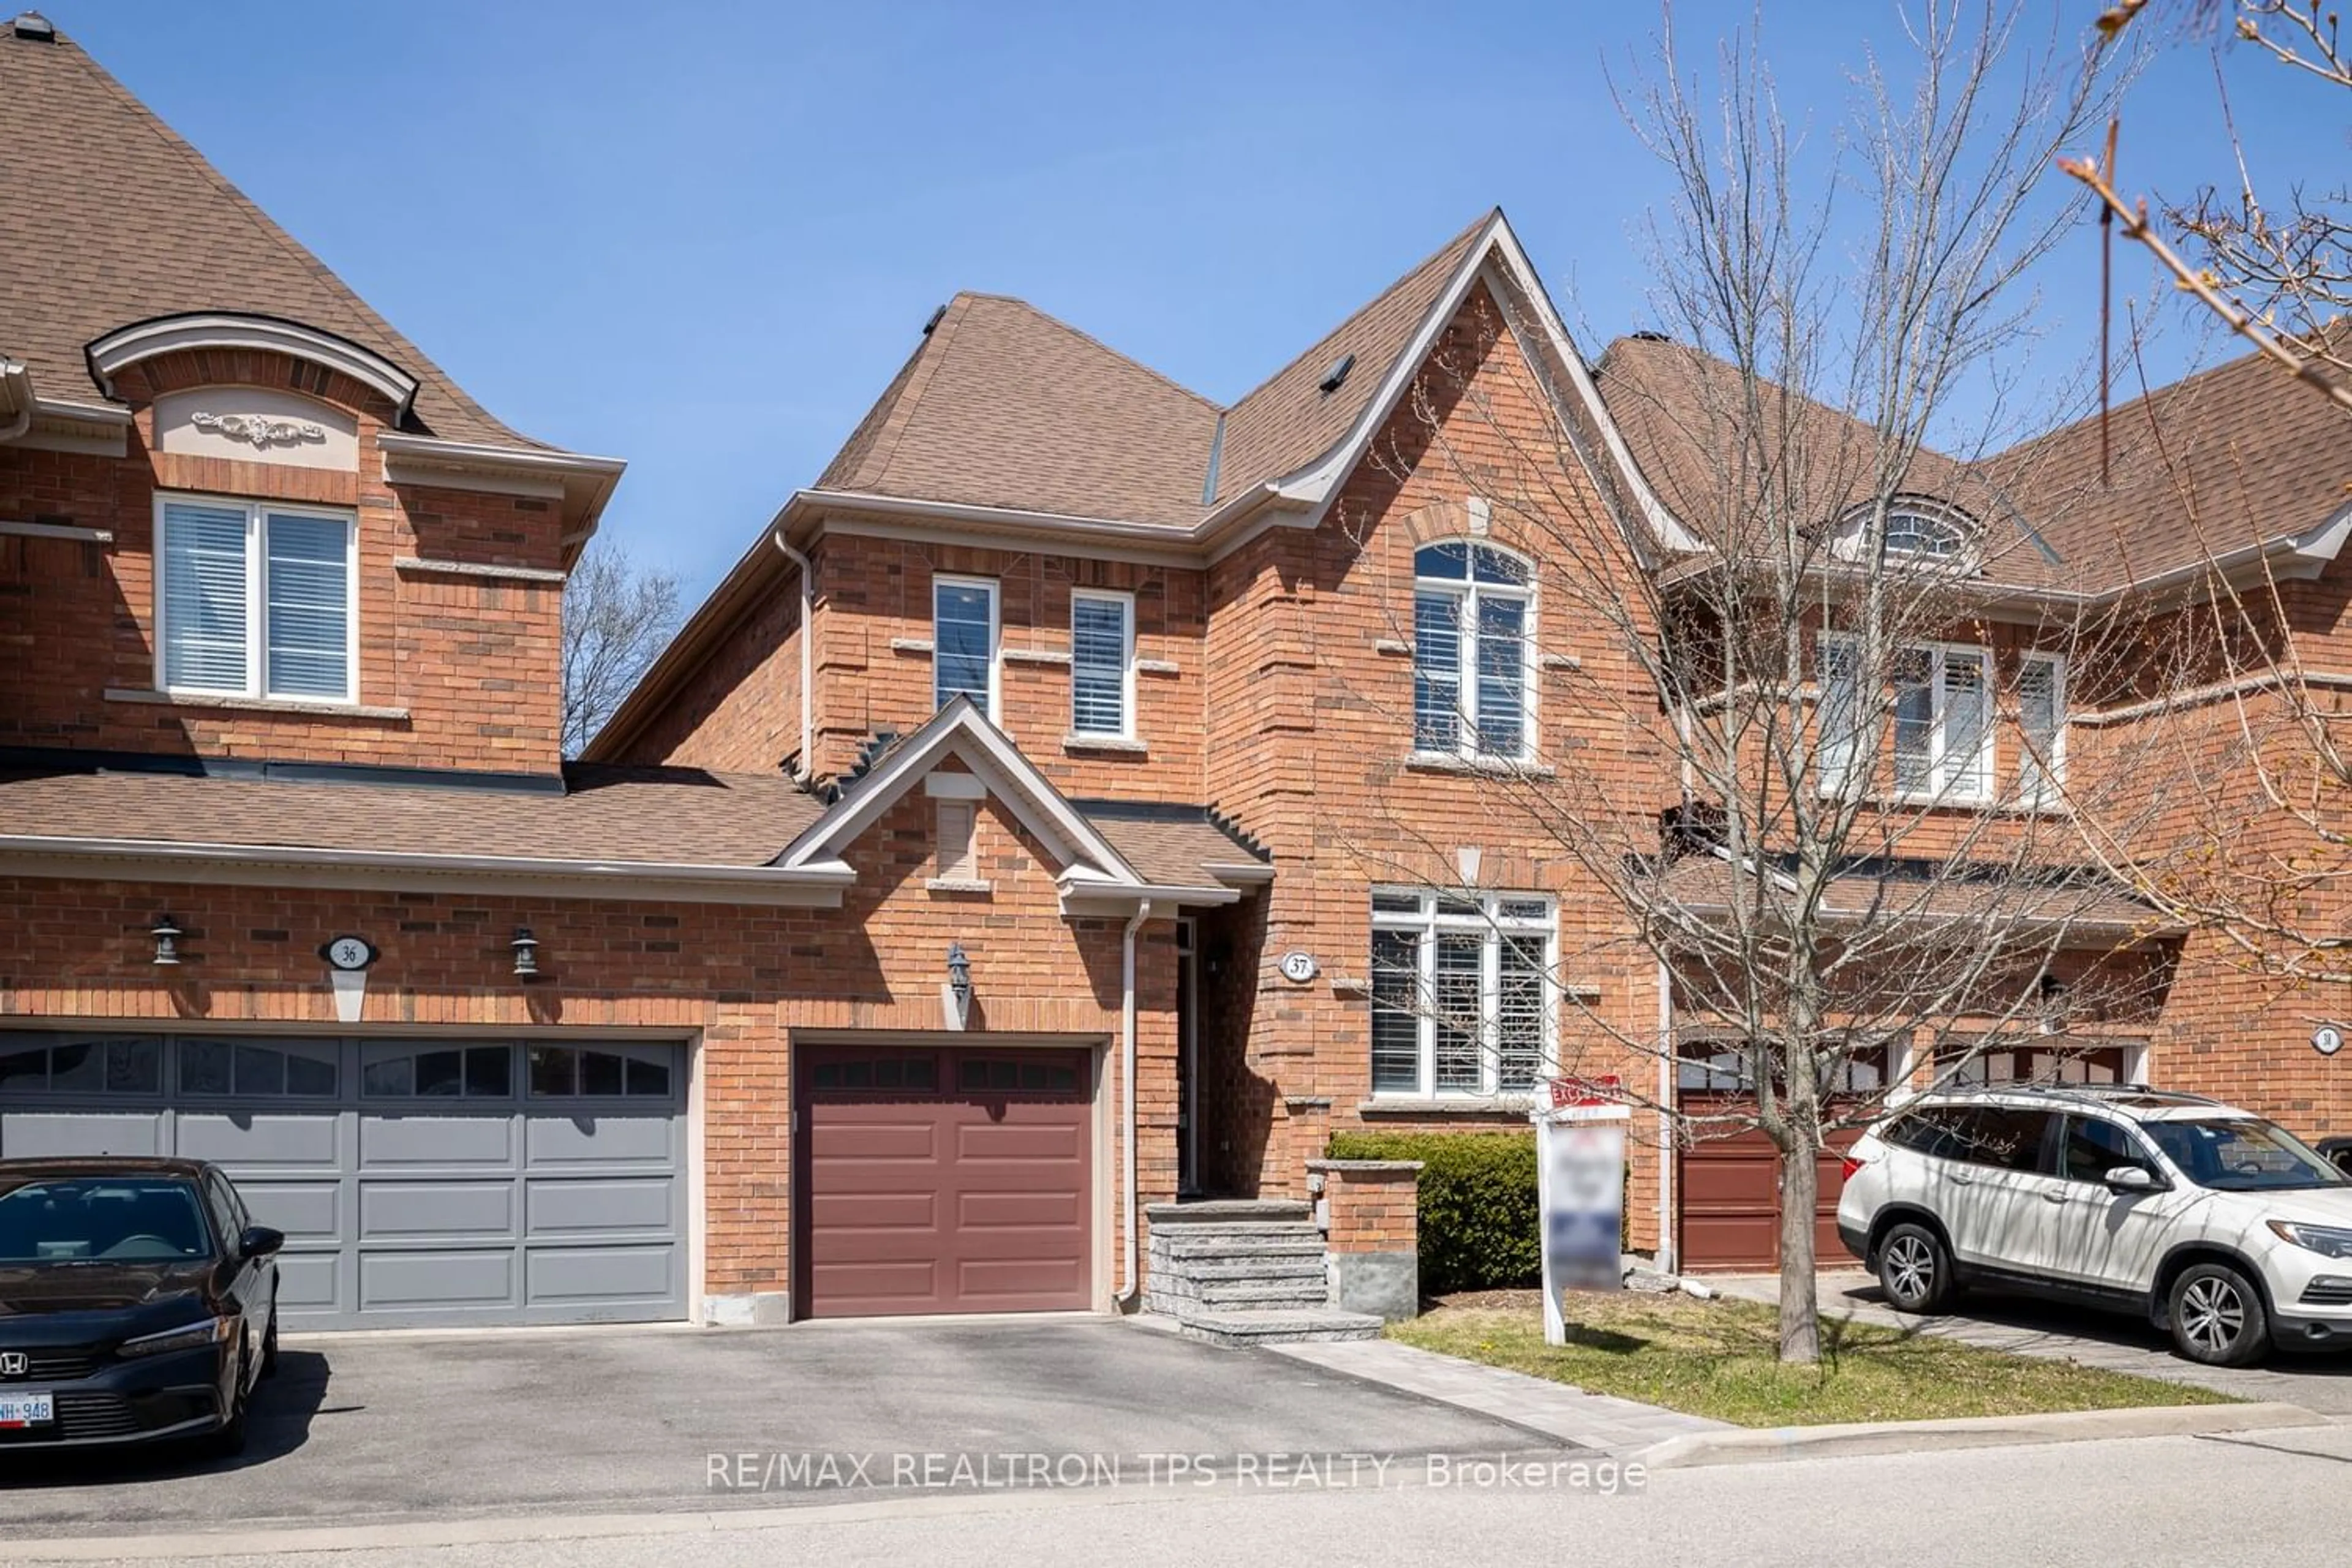 Home with brick exterior material for 484 Worthington Ave #37, Richmond Hill Ontario L4E 0E2